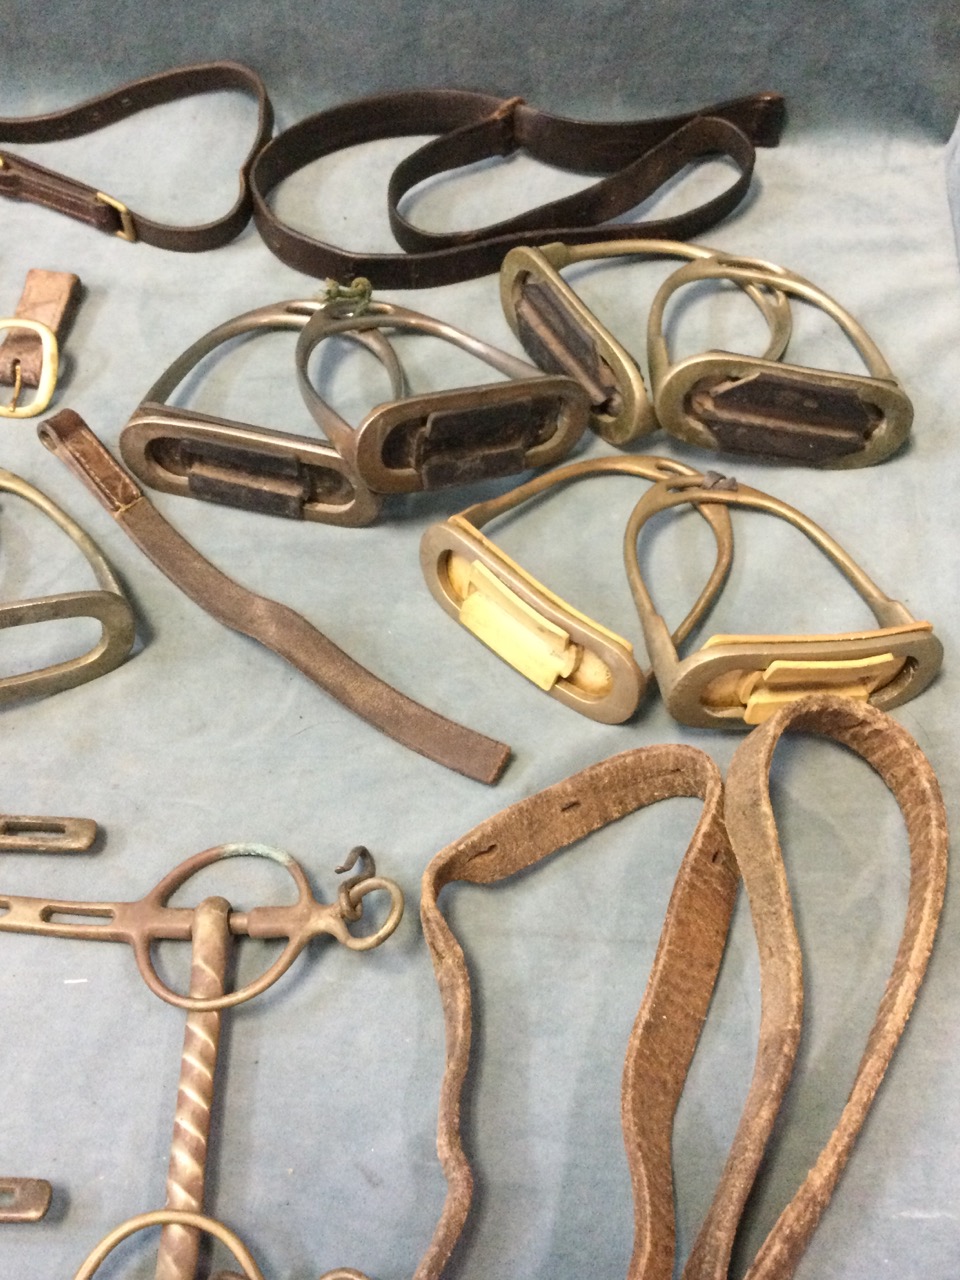 Miscellaneous horse tack - bits, pairs of stirrups - one dated 1914, straps/belts, horse brasses - Image 3 of 3